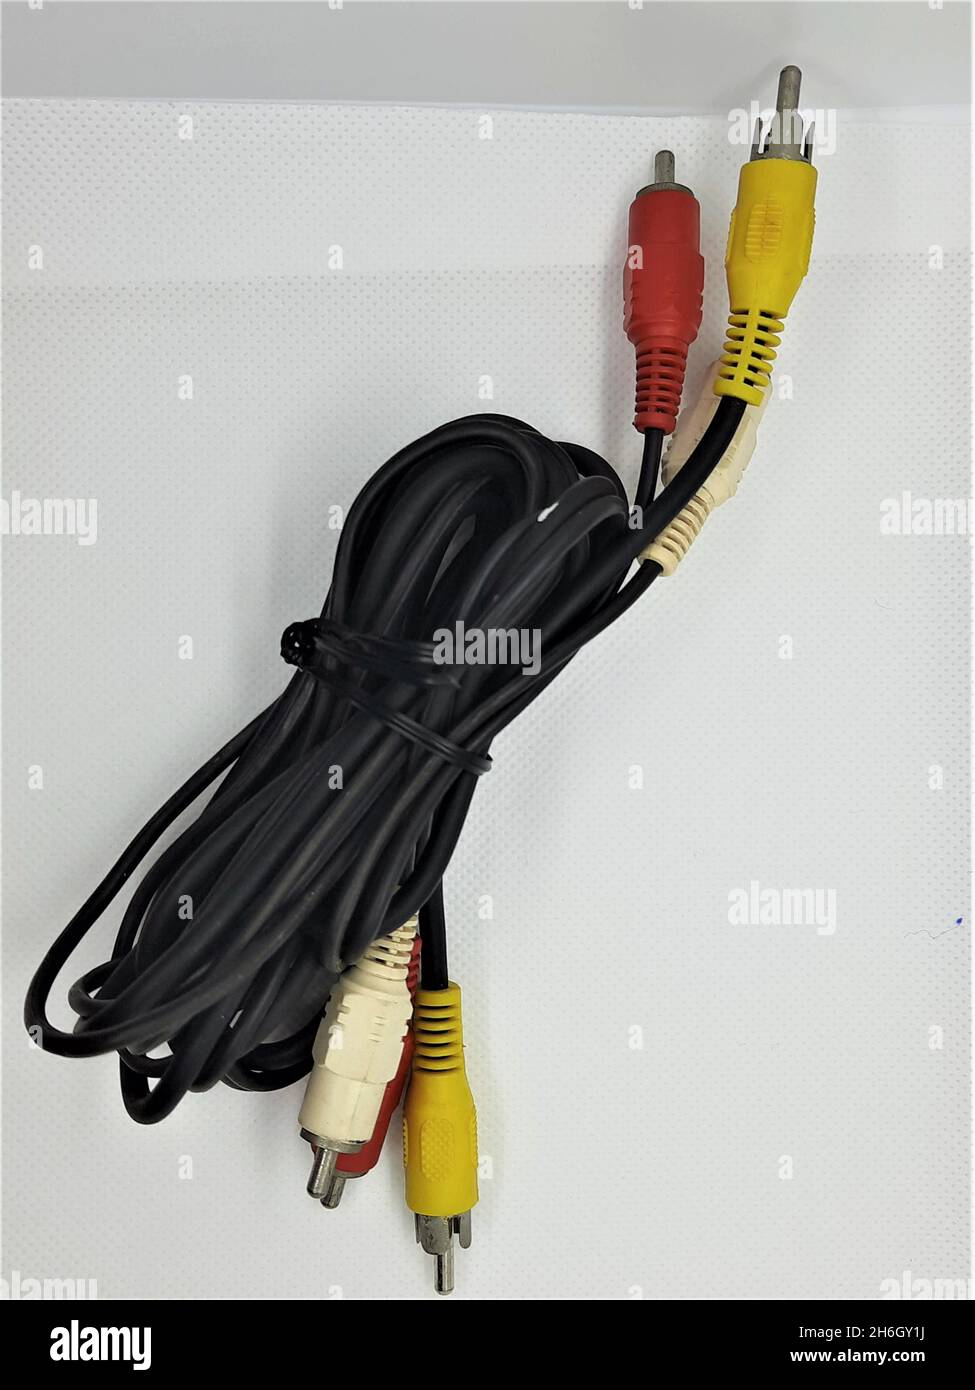 audio video RCA cable for video and audio data transmission Stock Photo